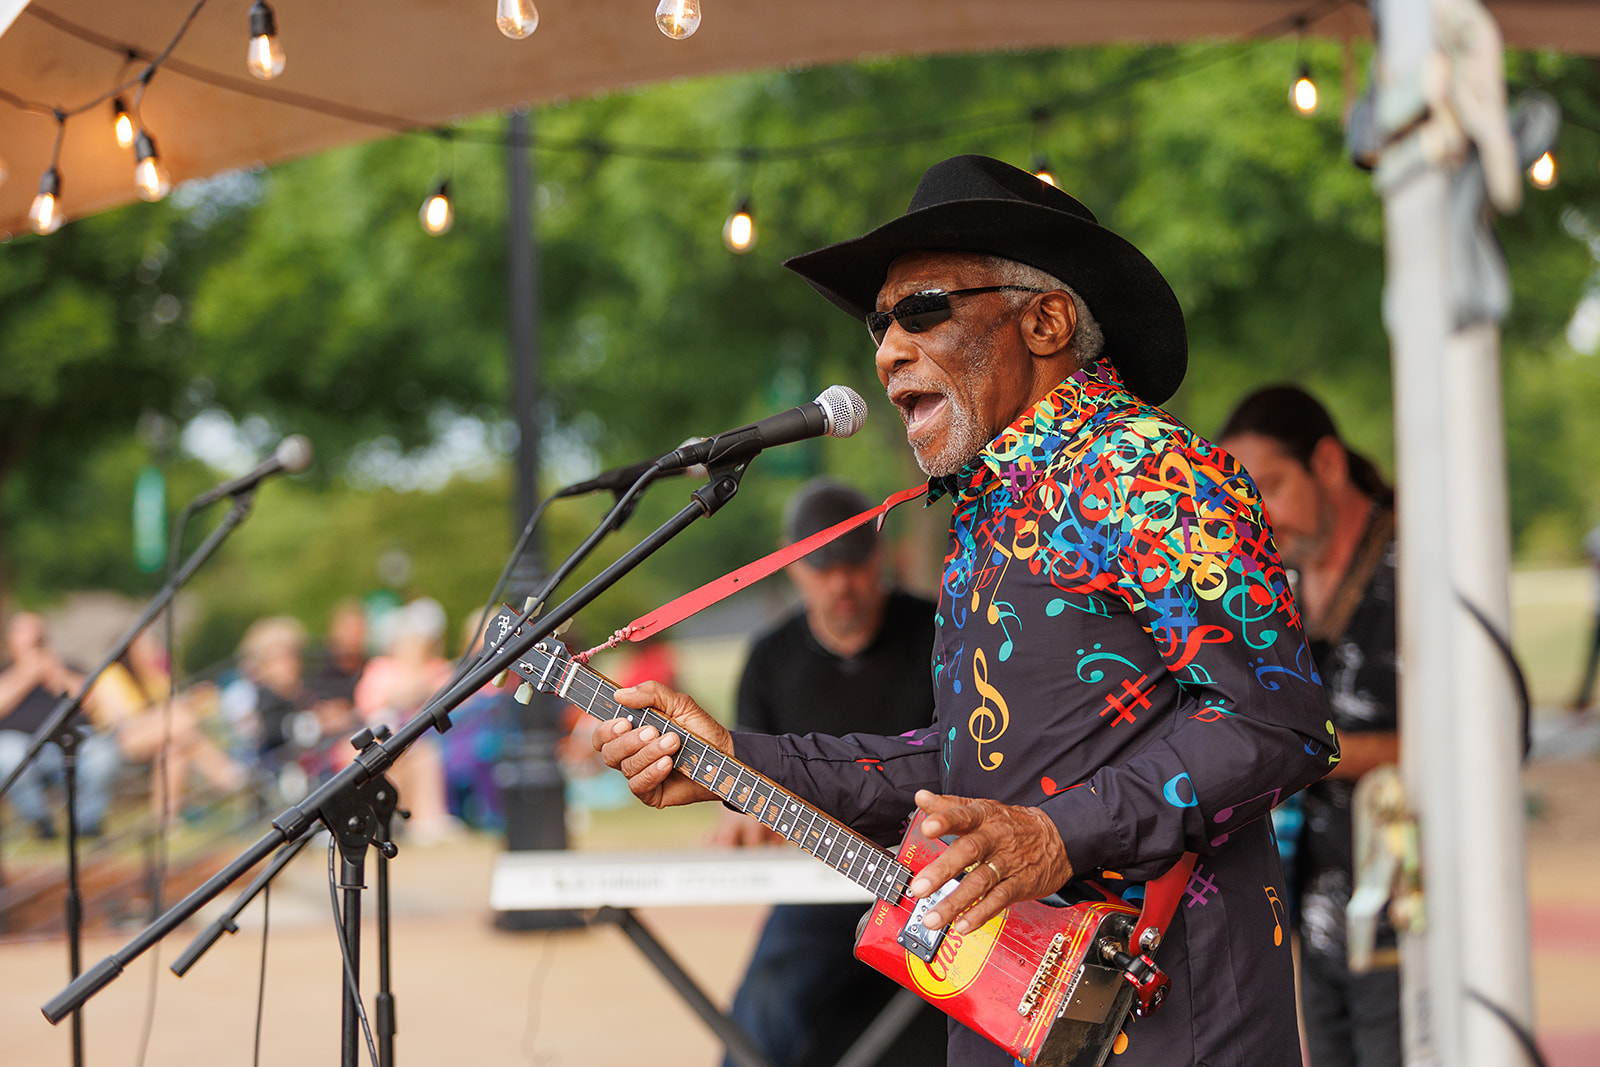 Mac Arnold performing at Tunes in the Park